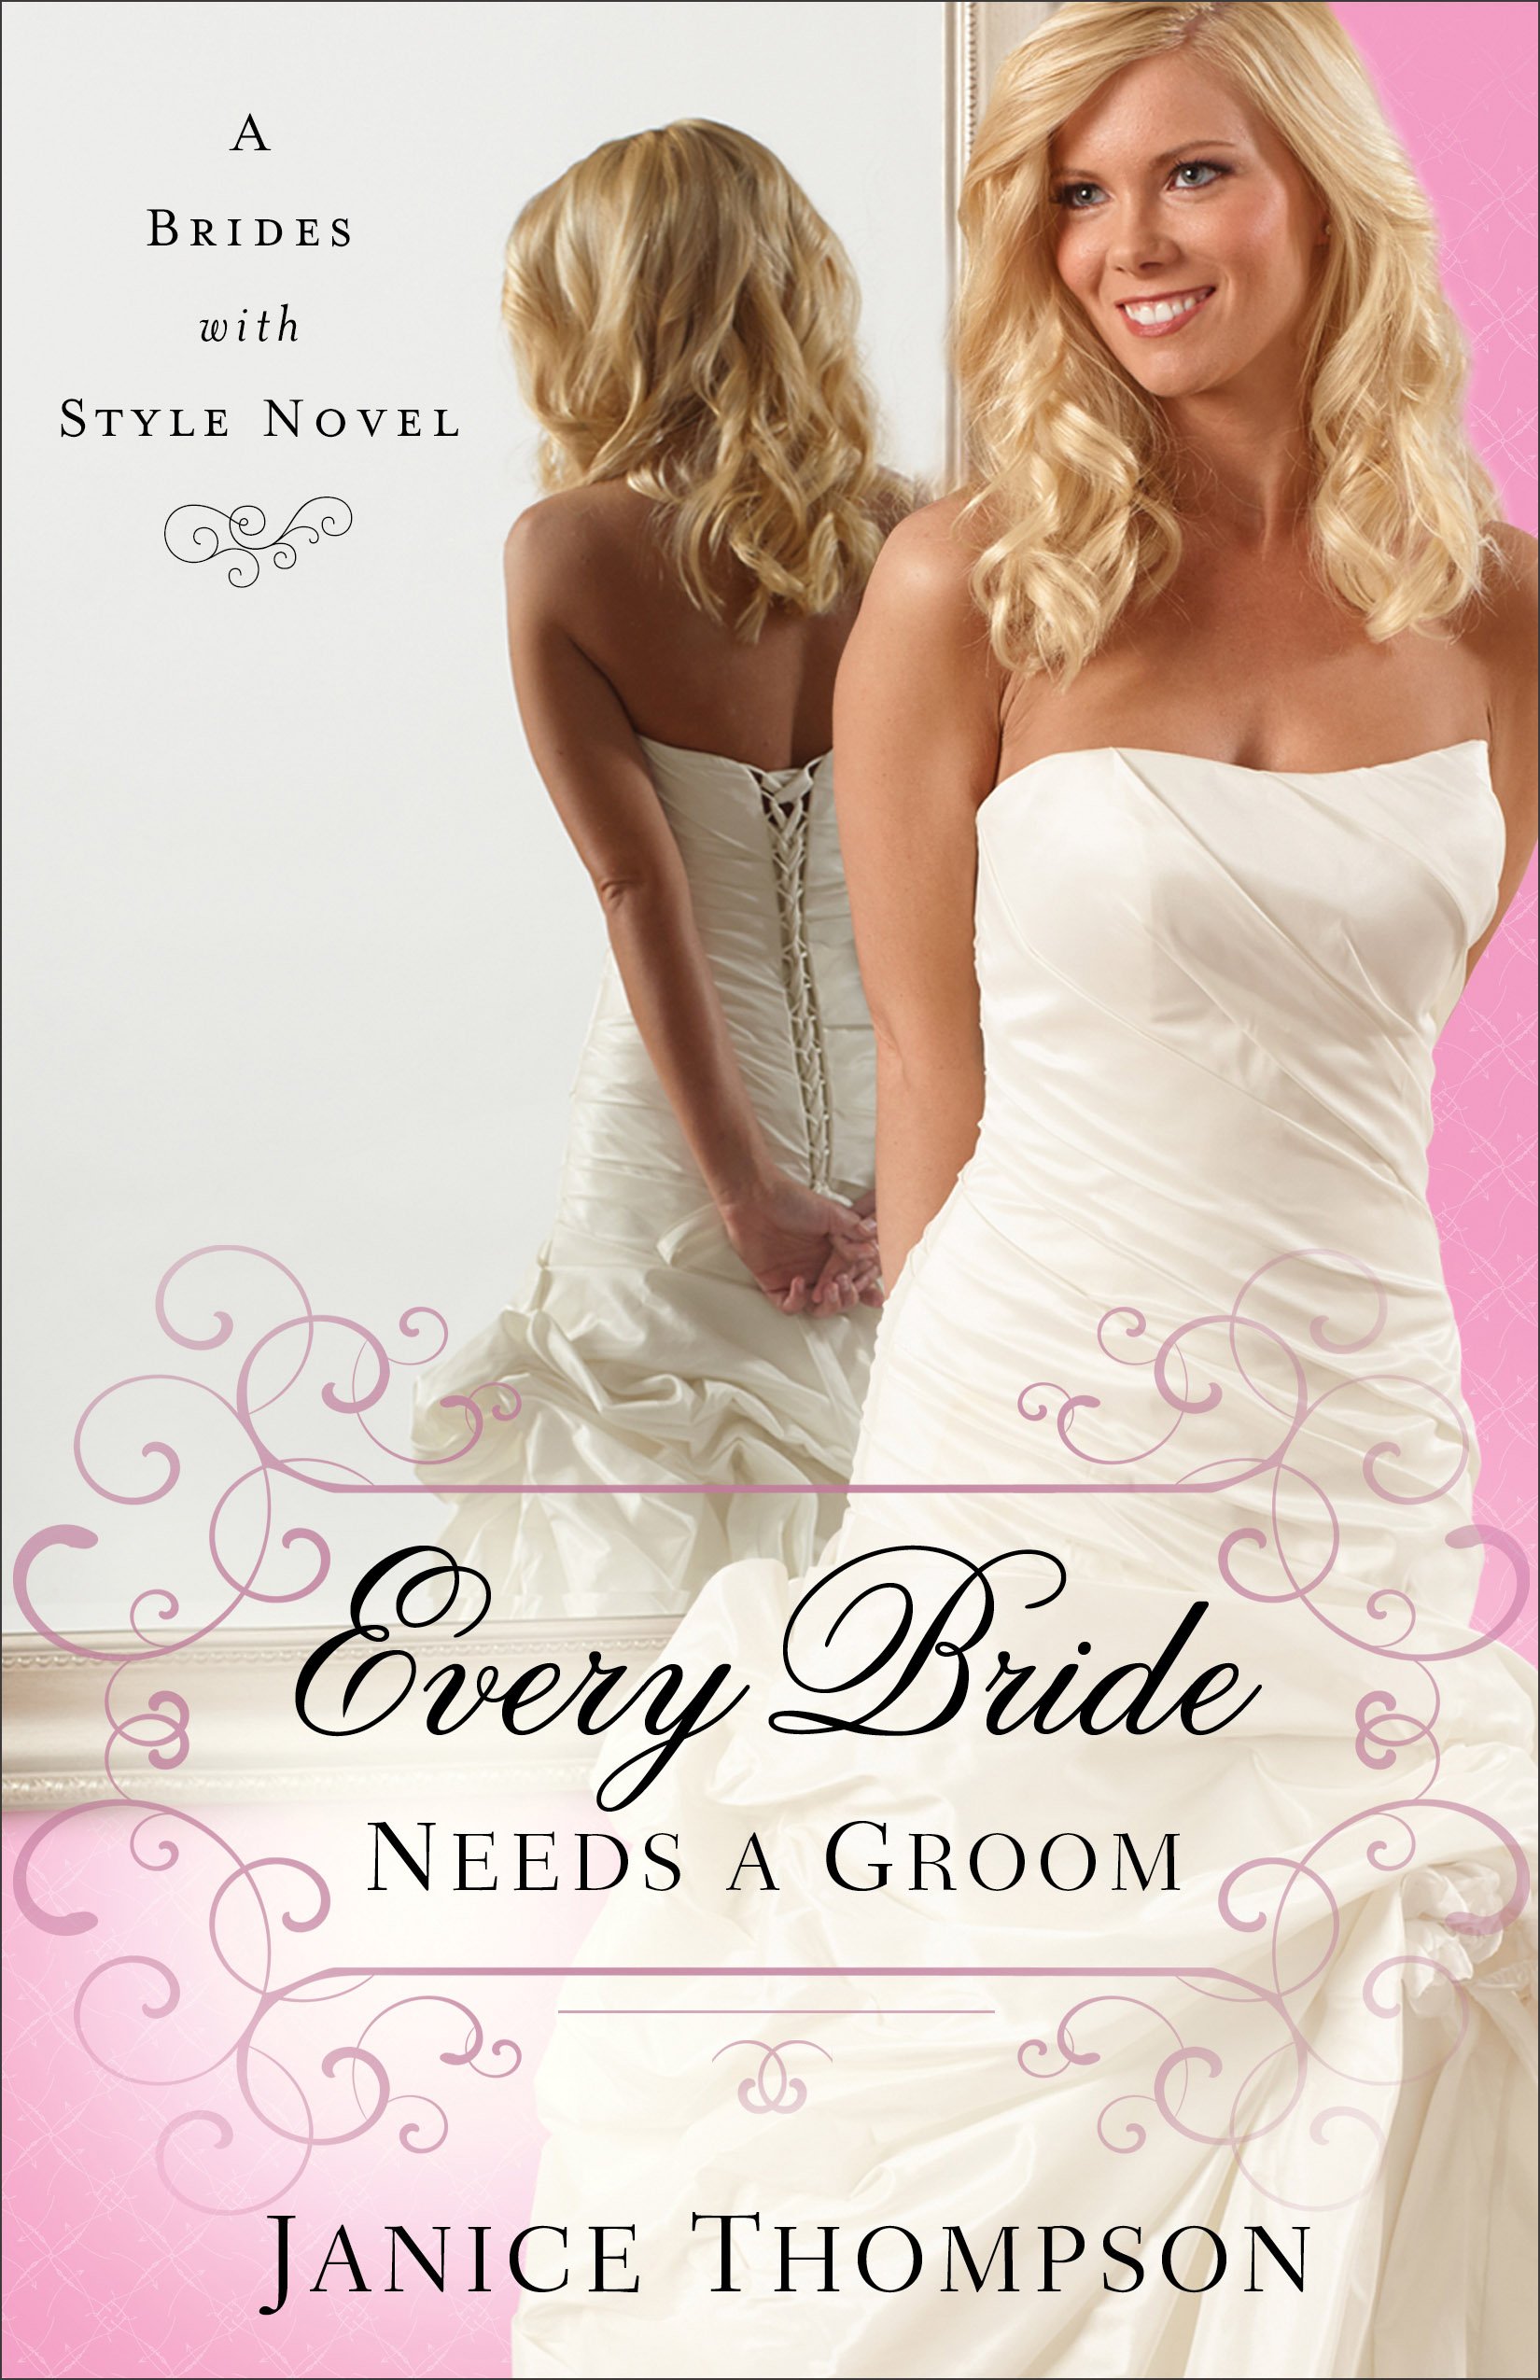 Book Review: Every Bride Needs a Groom by Janice Thompson